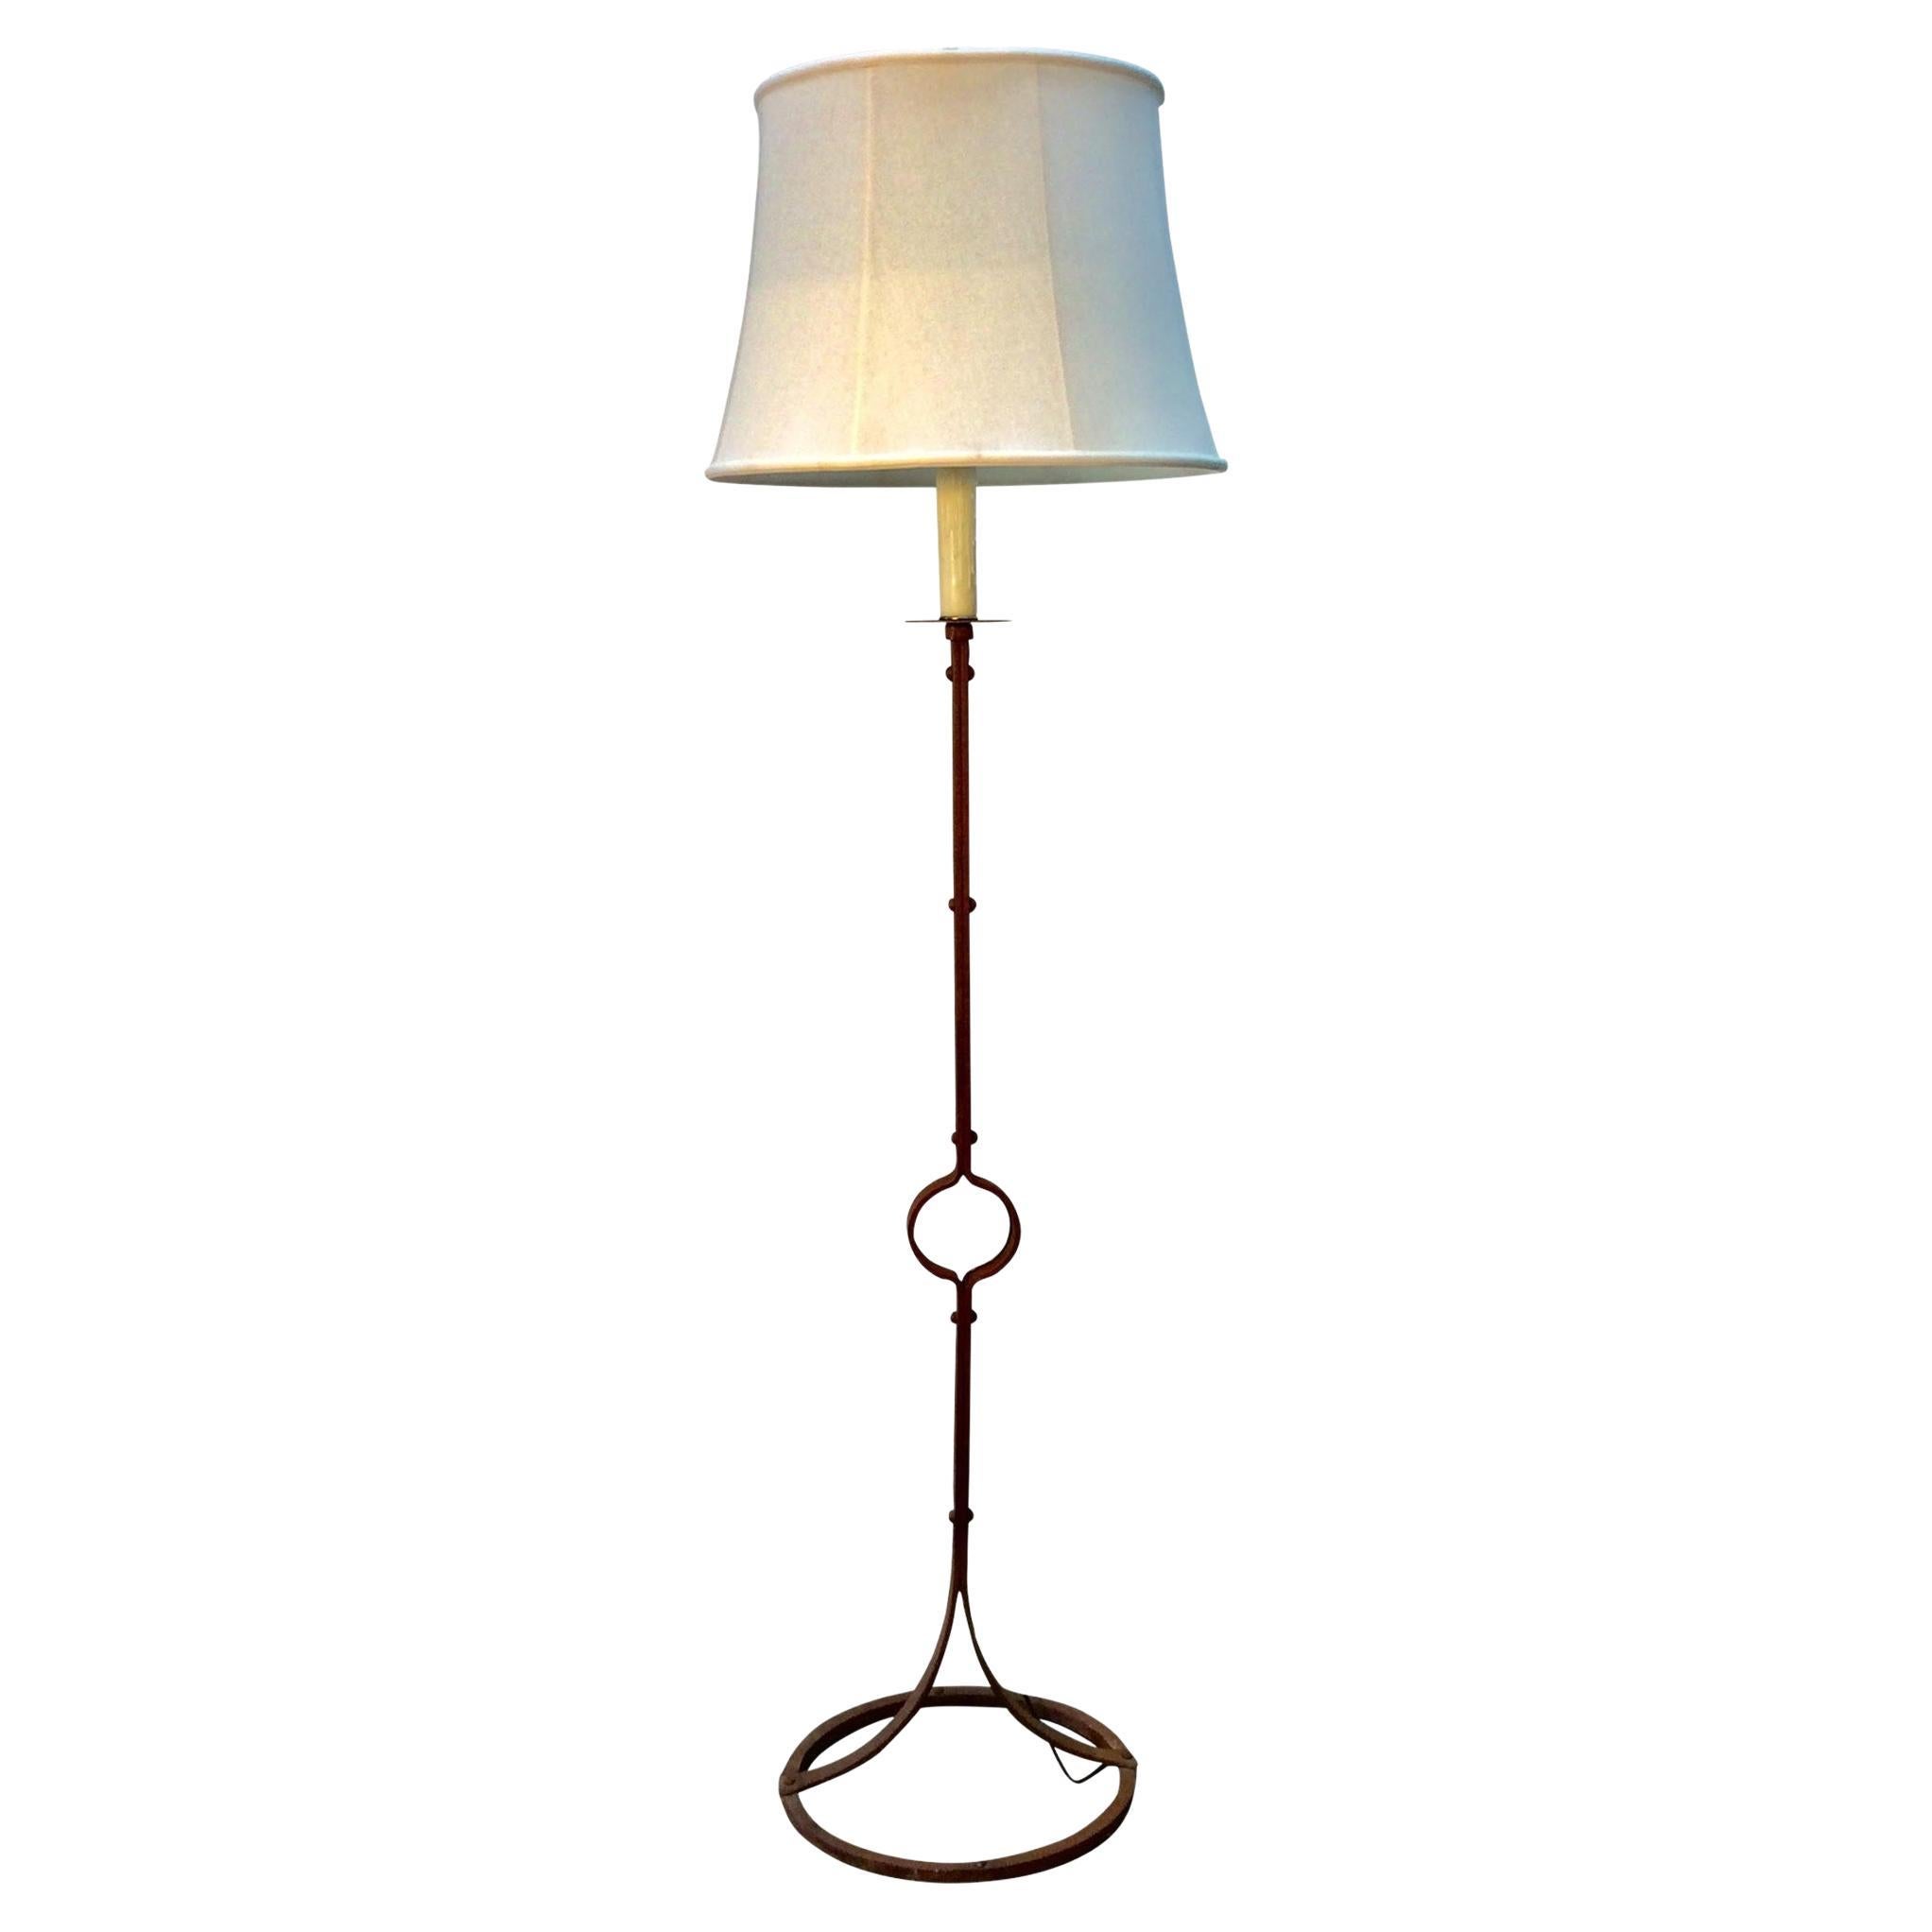 Early 20th Century French Iron Floor Lamp For Sale